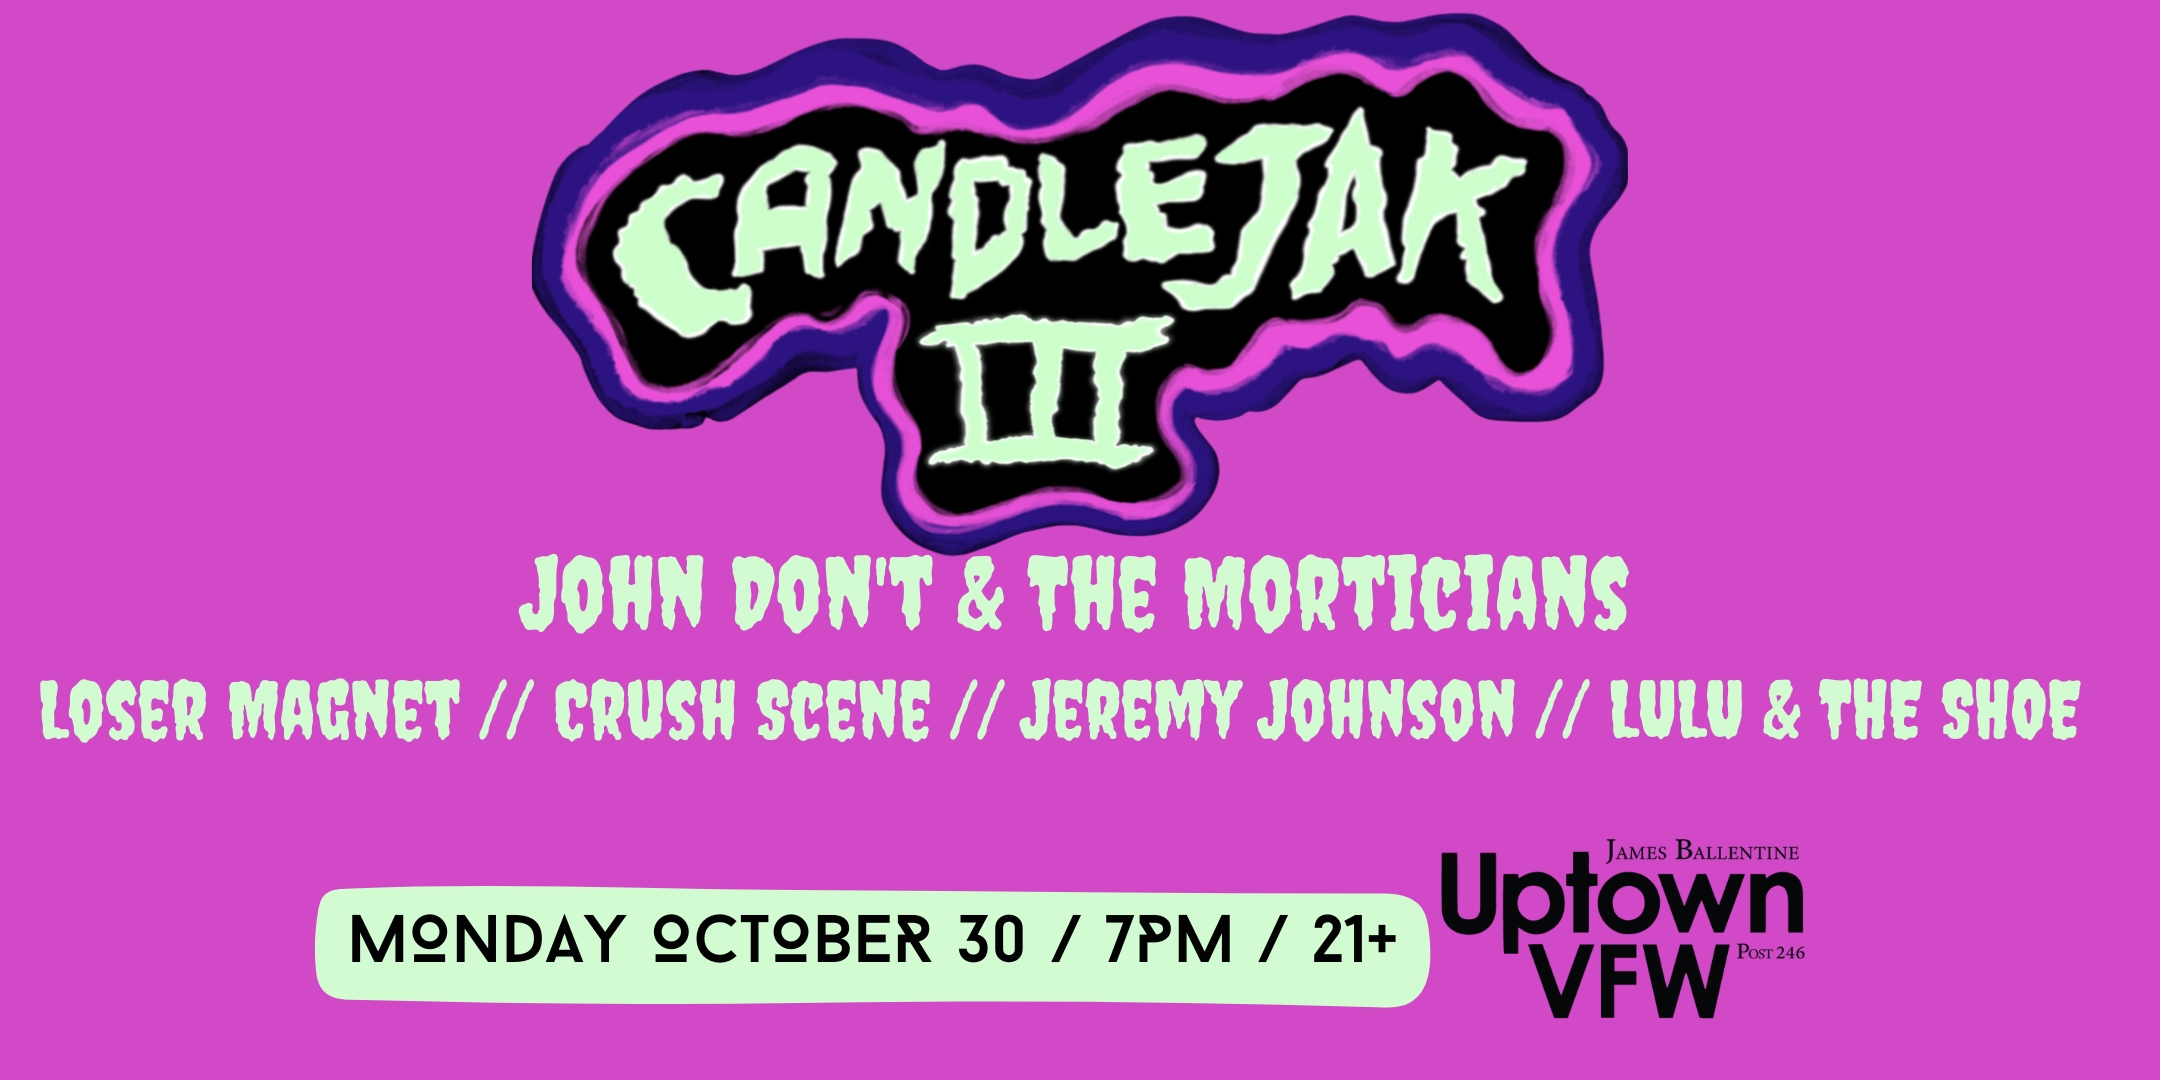 CandleJak III John Don't & The Morticians Loser Magnet Crush Scene Jeremy Johnson Lulu & The Shoe Monday, October 30 James Ballentine "Uptown" VFW Post 246 Doors 7:00pm :: Music 7:30pm :: 21+ GA $10 ADV / $15 DOS NO REFUNDS Tickets On-Sale Now